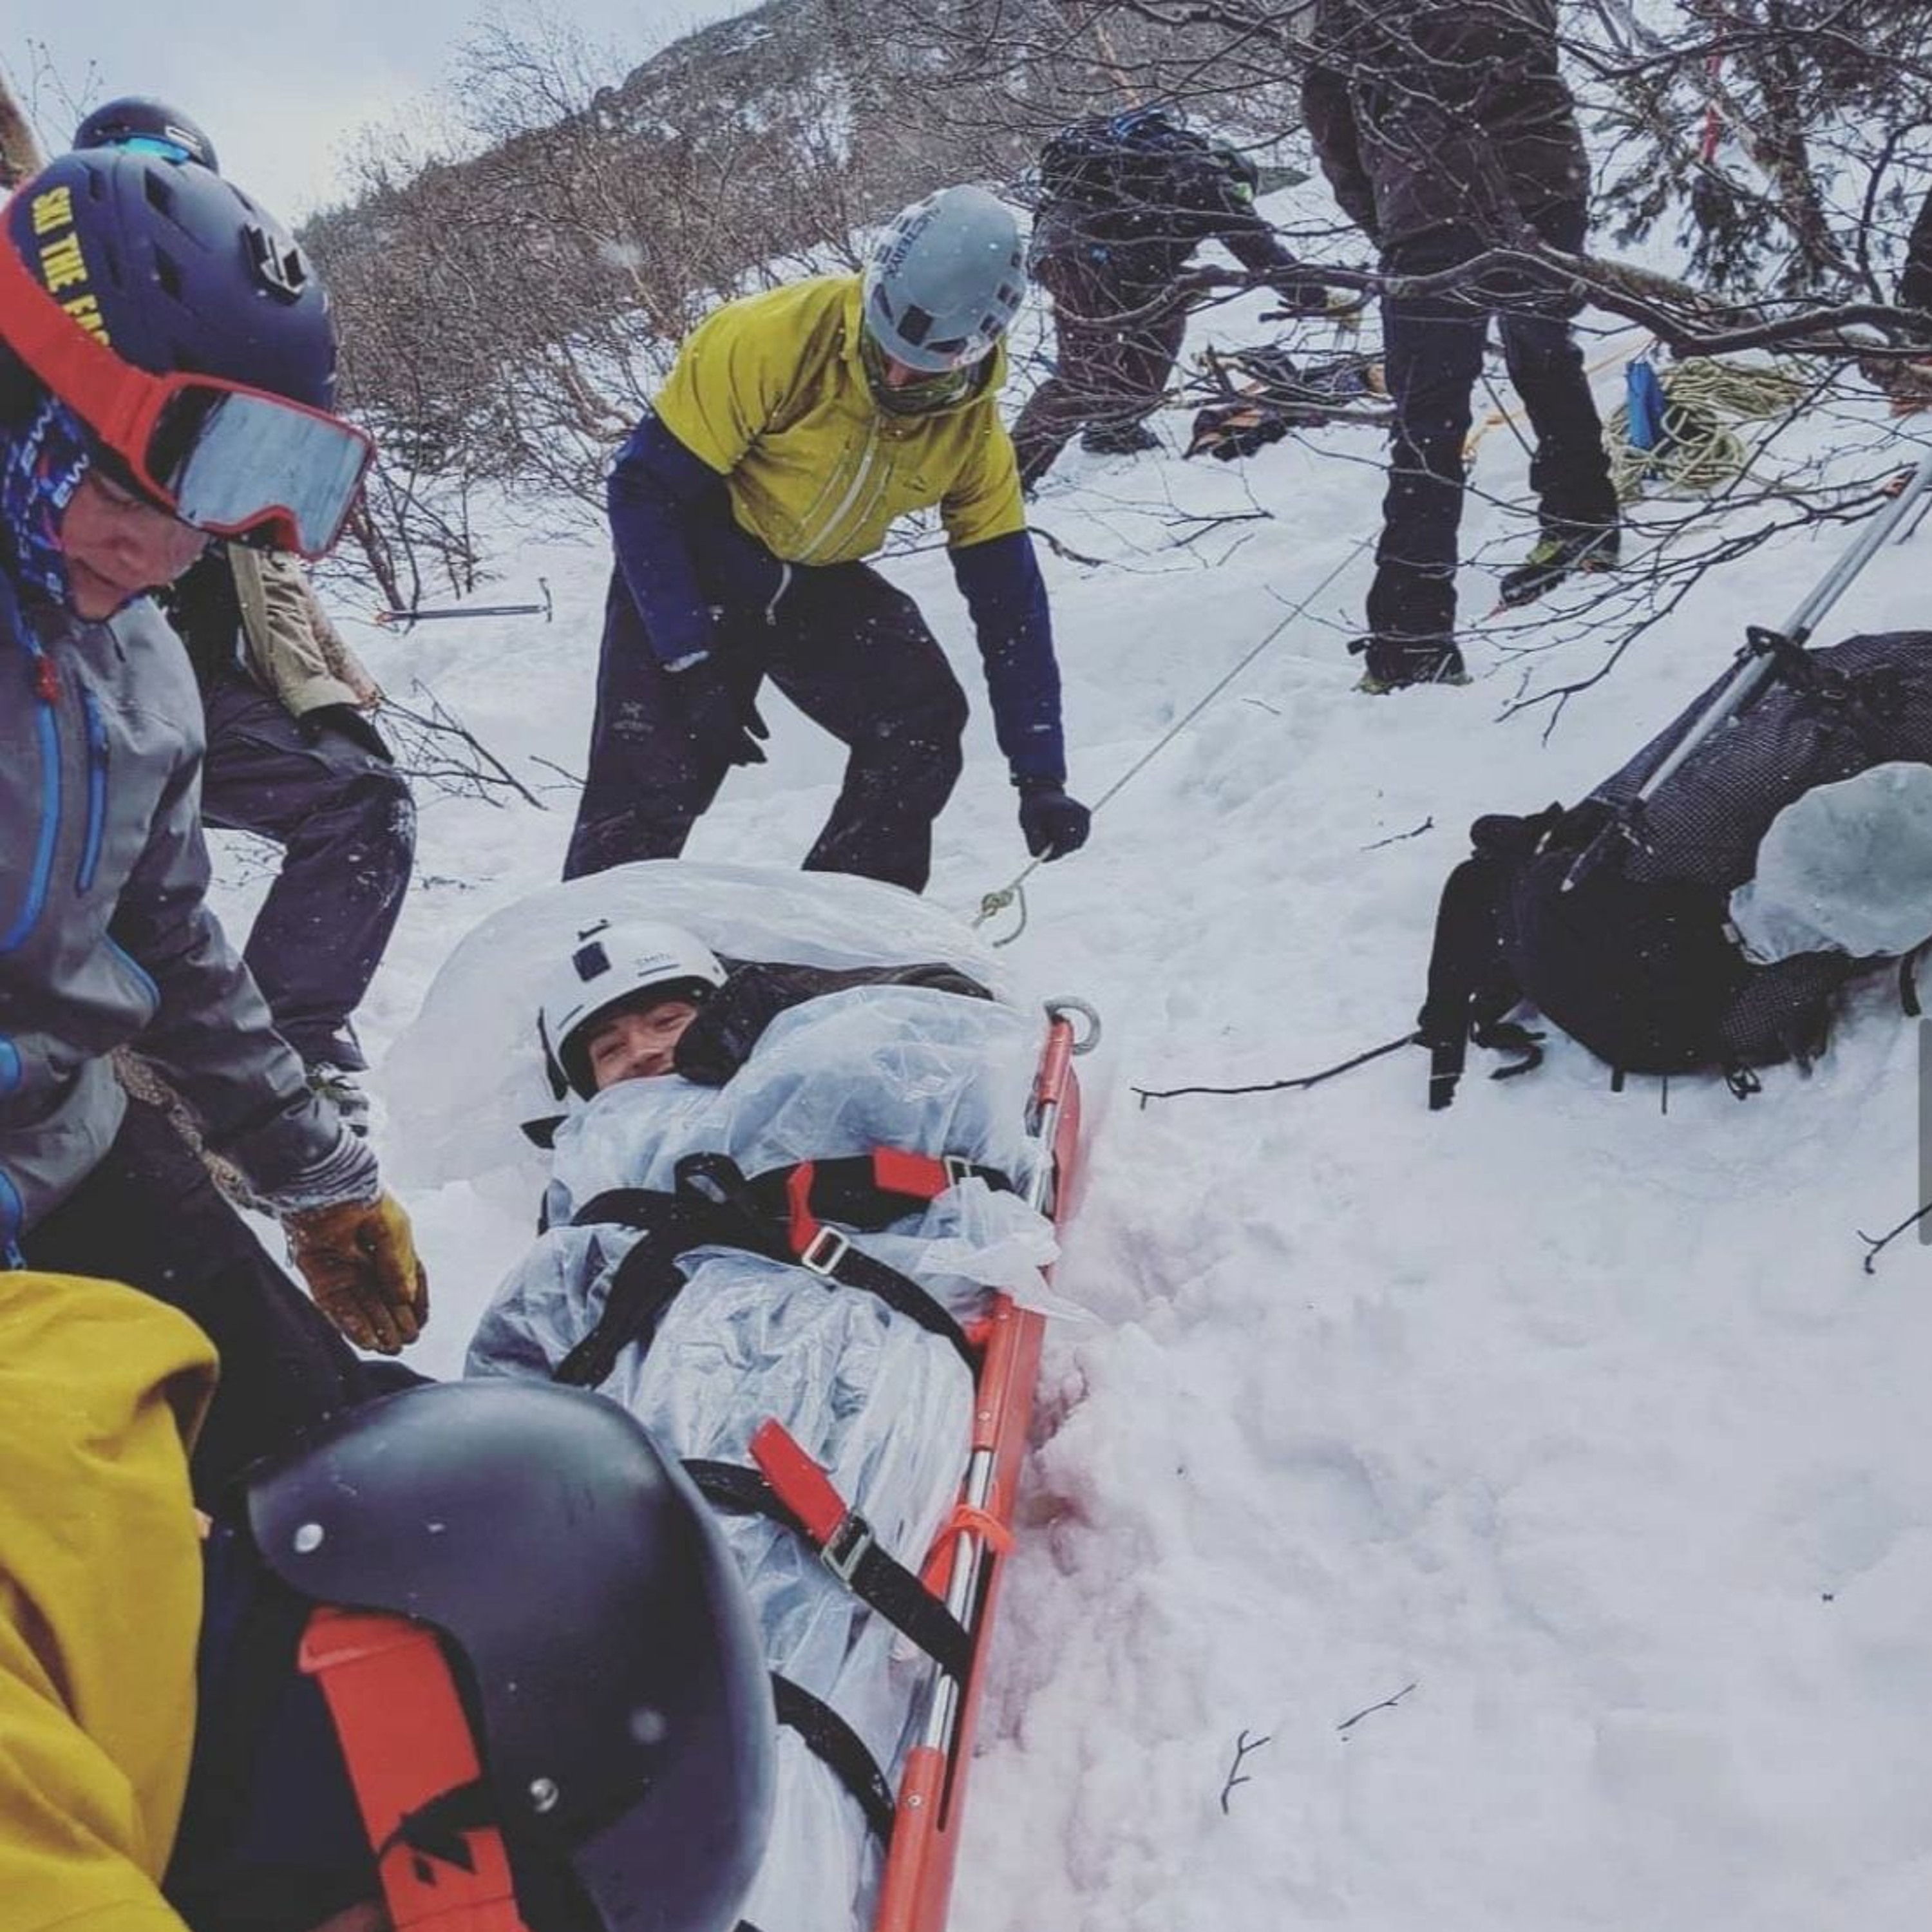 Ep 99 - Backcountry Ski Accident: Part One - Taylor Rose